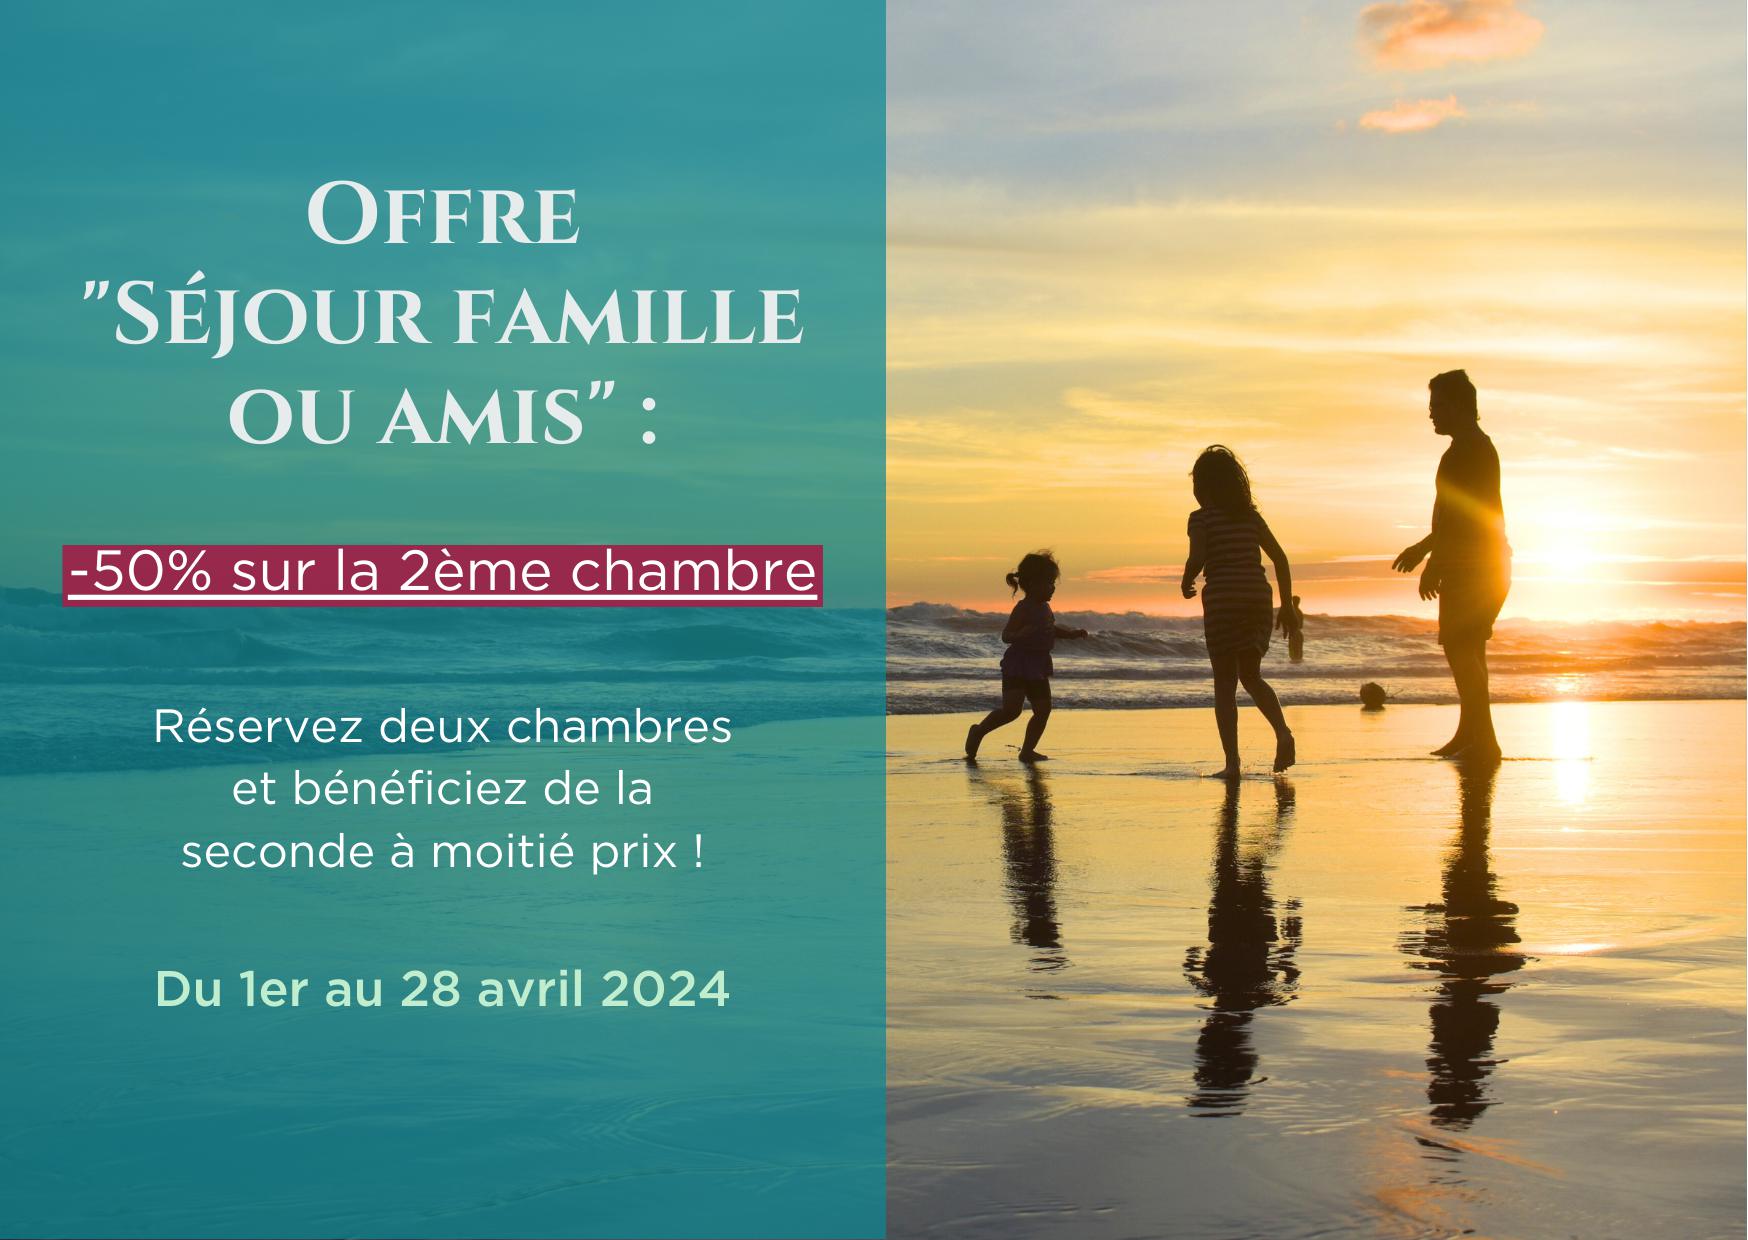 Hotel with family or friends in Vannes : 2nd room at half price !